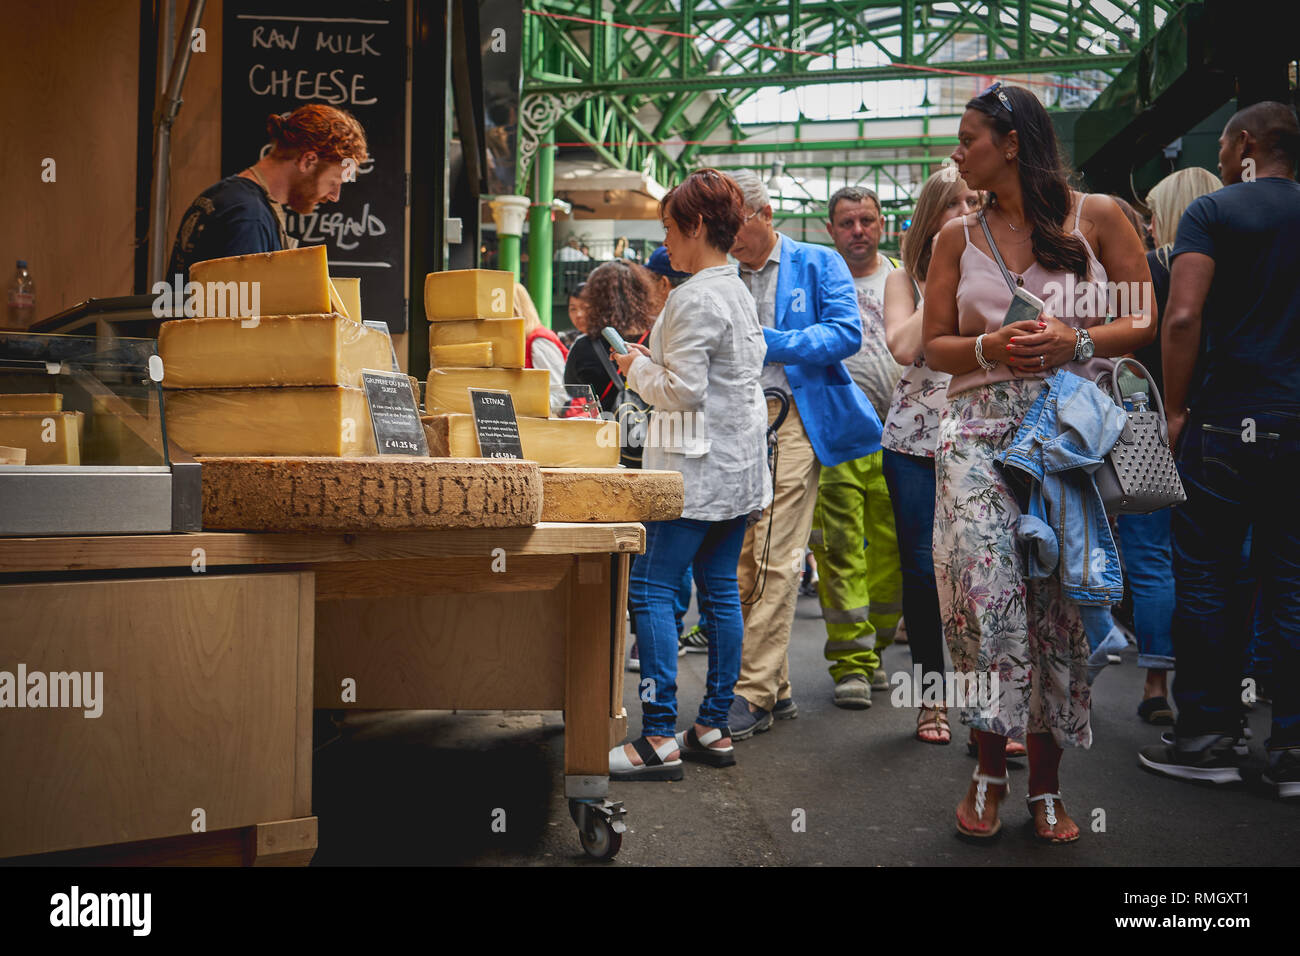 London, UK - June, 2018. Swiss Gruyere cheese on sale at a stall in Borough Market, one of the oldest and largest food market in London. Stock Photo